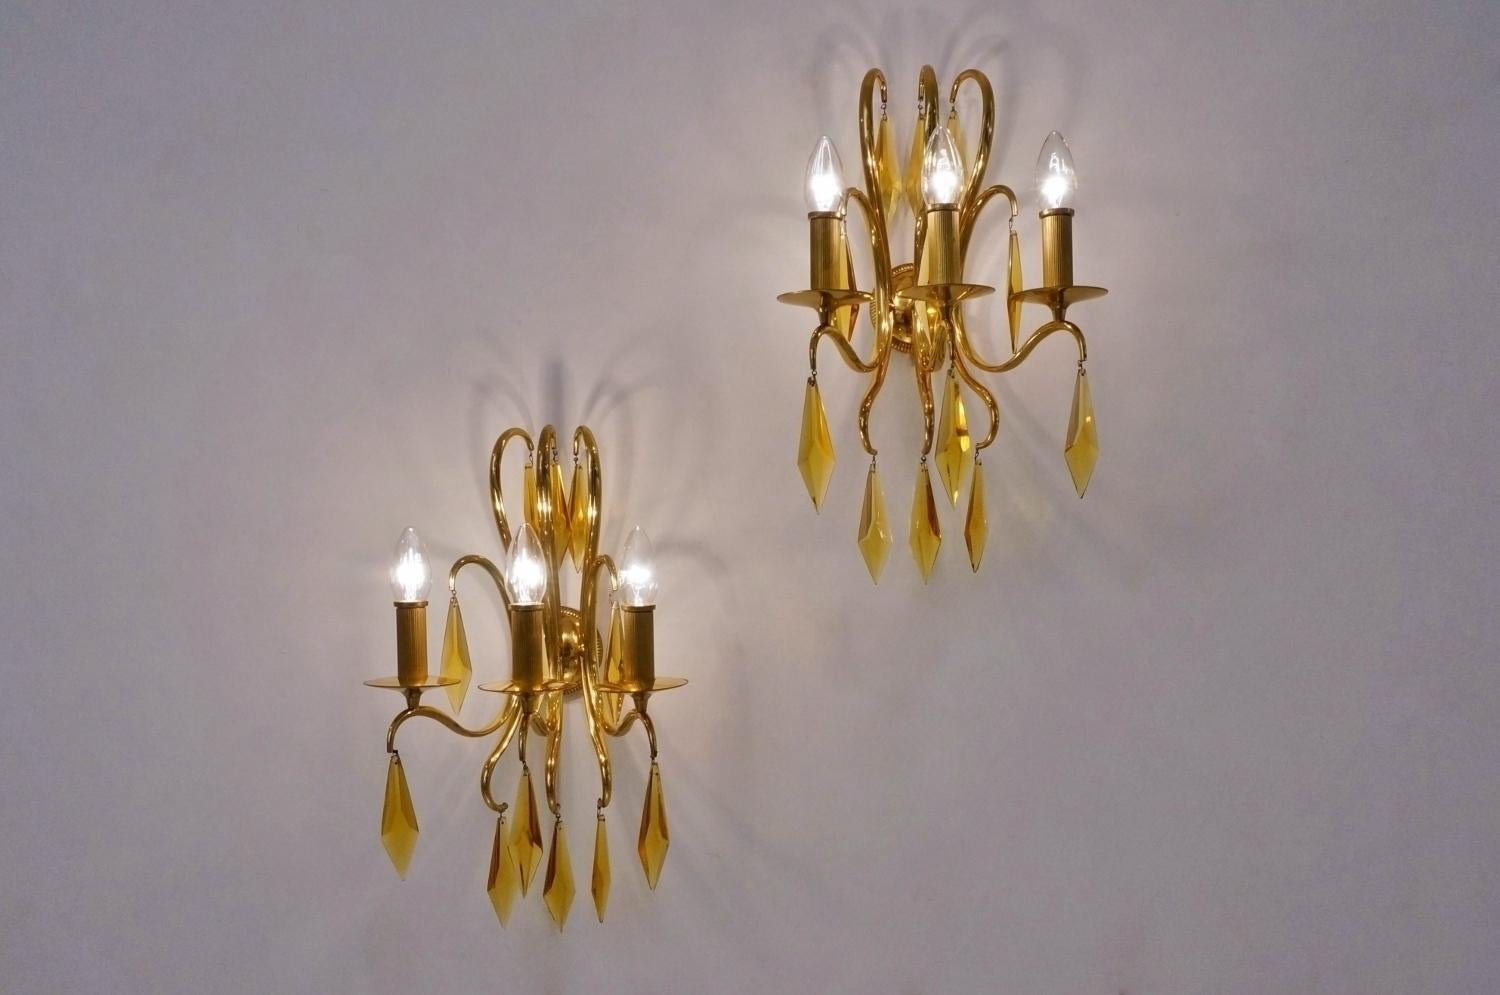 1940s French bronze wall lights attributed to André Arbus. Each wall light is finished with 12 elegant amber faceted crystals which add to this sense of movement and glamour. The swirling metal work has a unique almost 'whiplash curves'